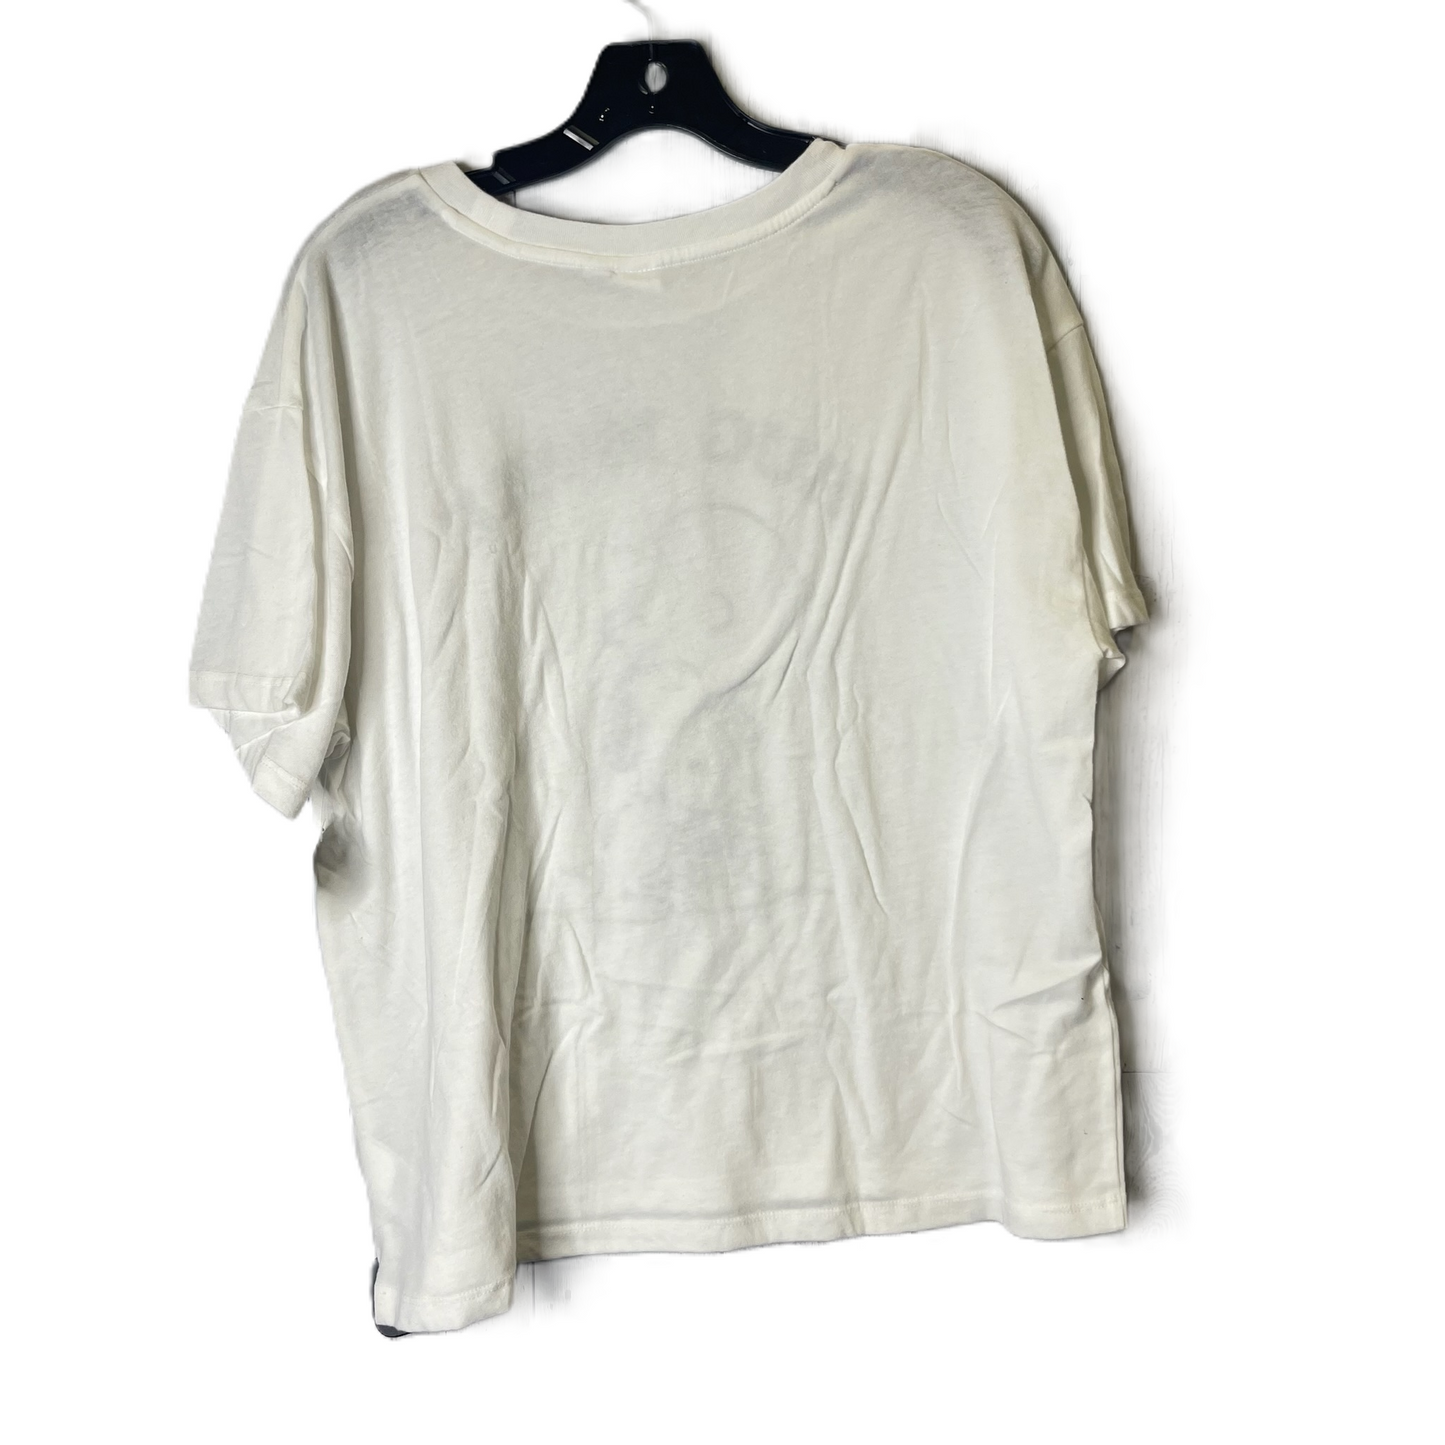 White Top Short Sleeve By Gap, Size: L